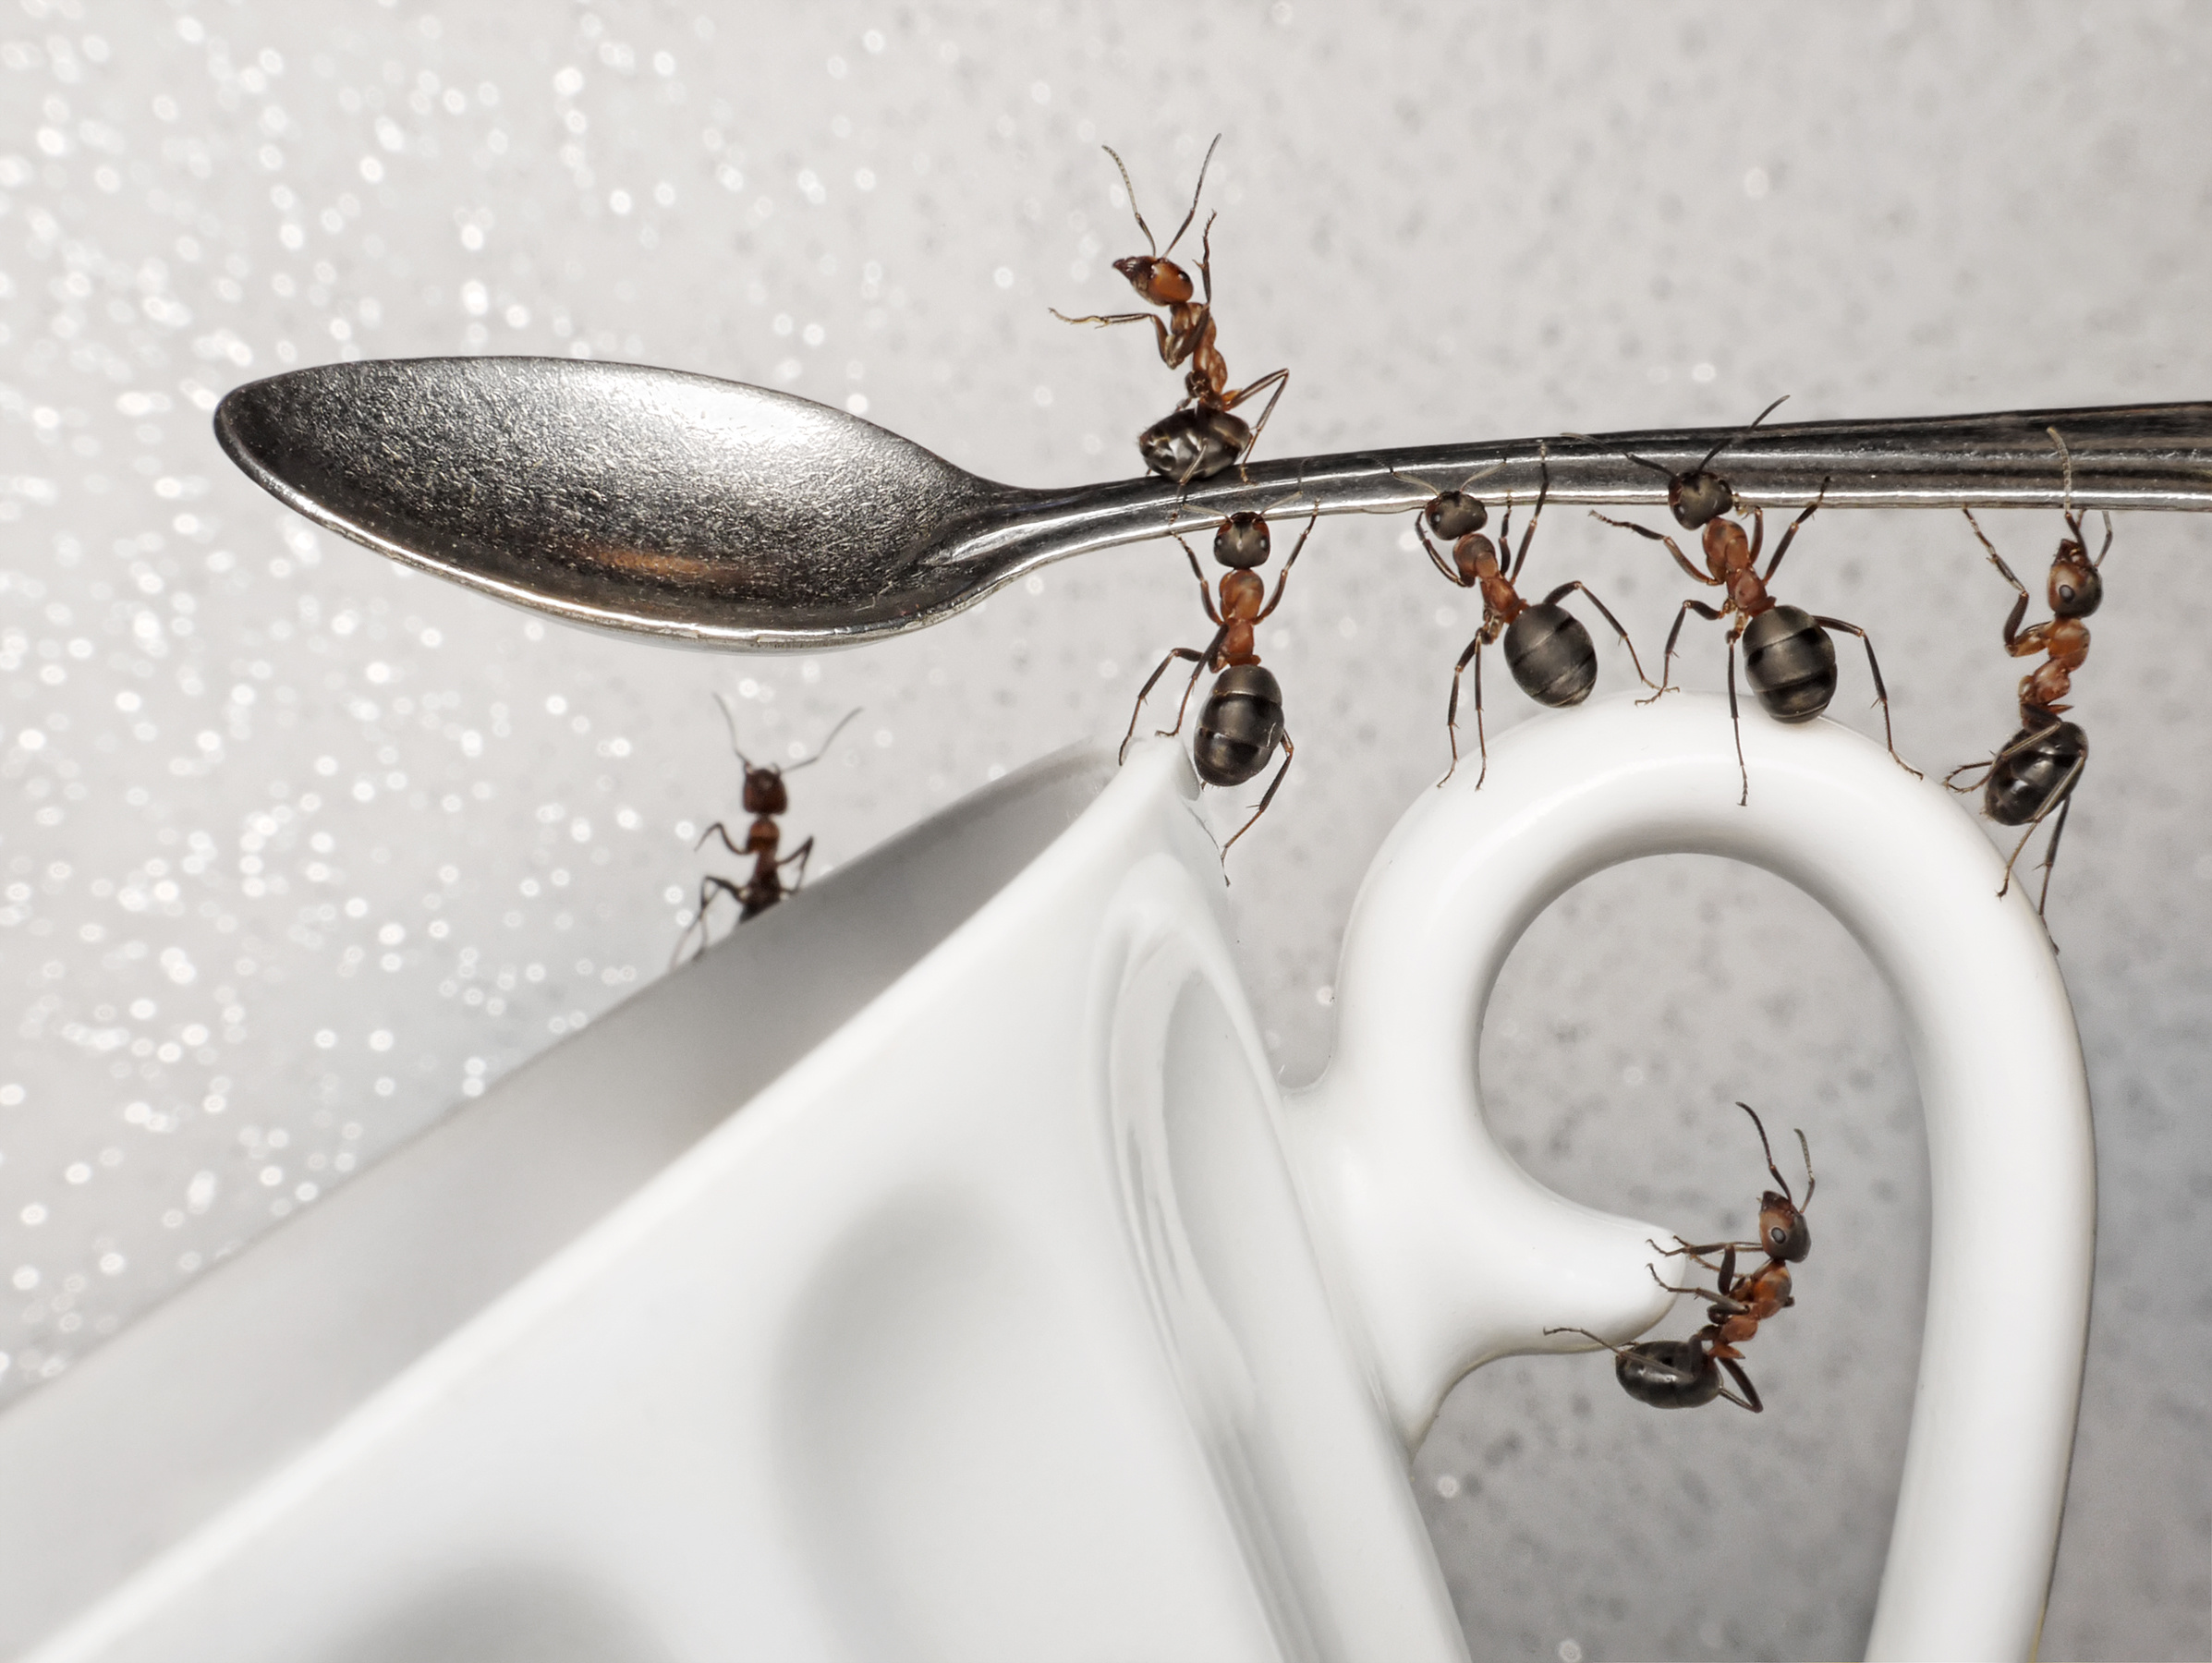 How To Get Rid of Ants In House? 4 Easy Ways To Kill Ants